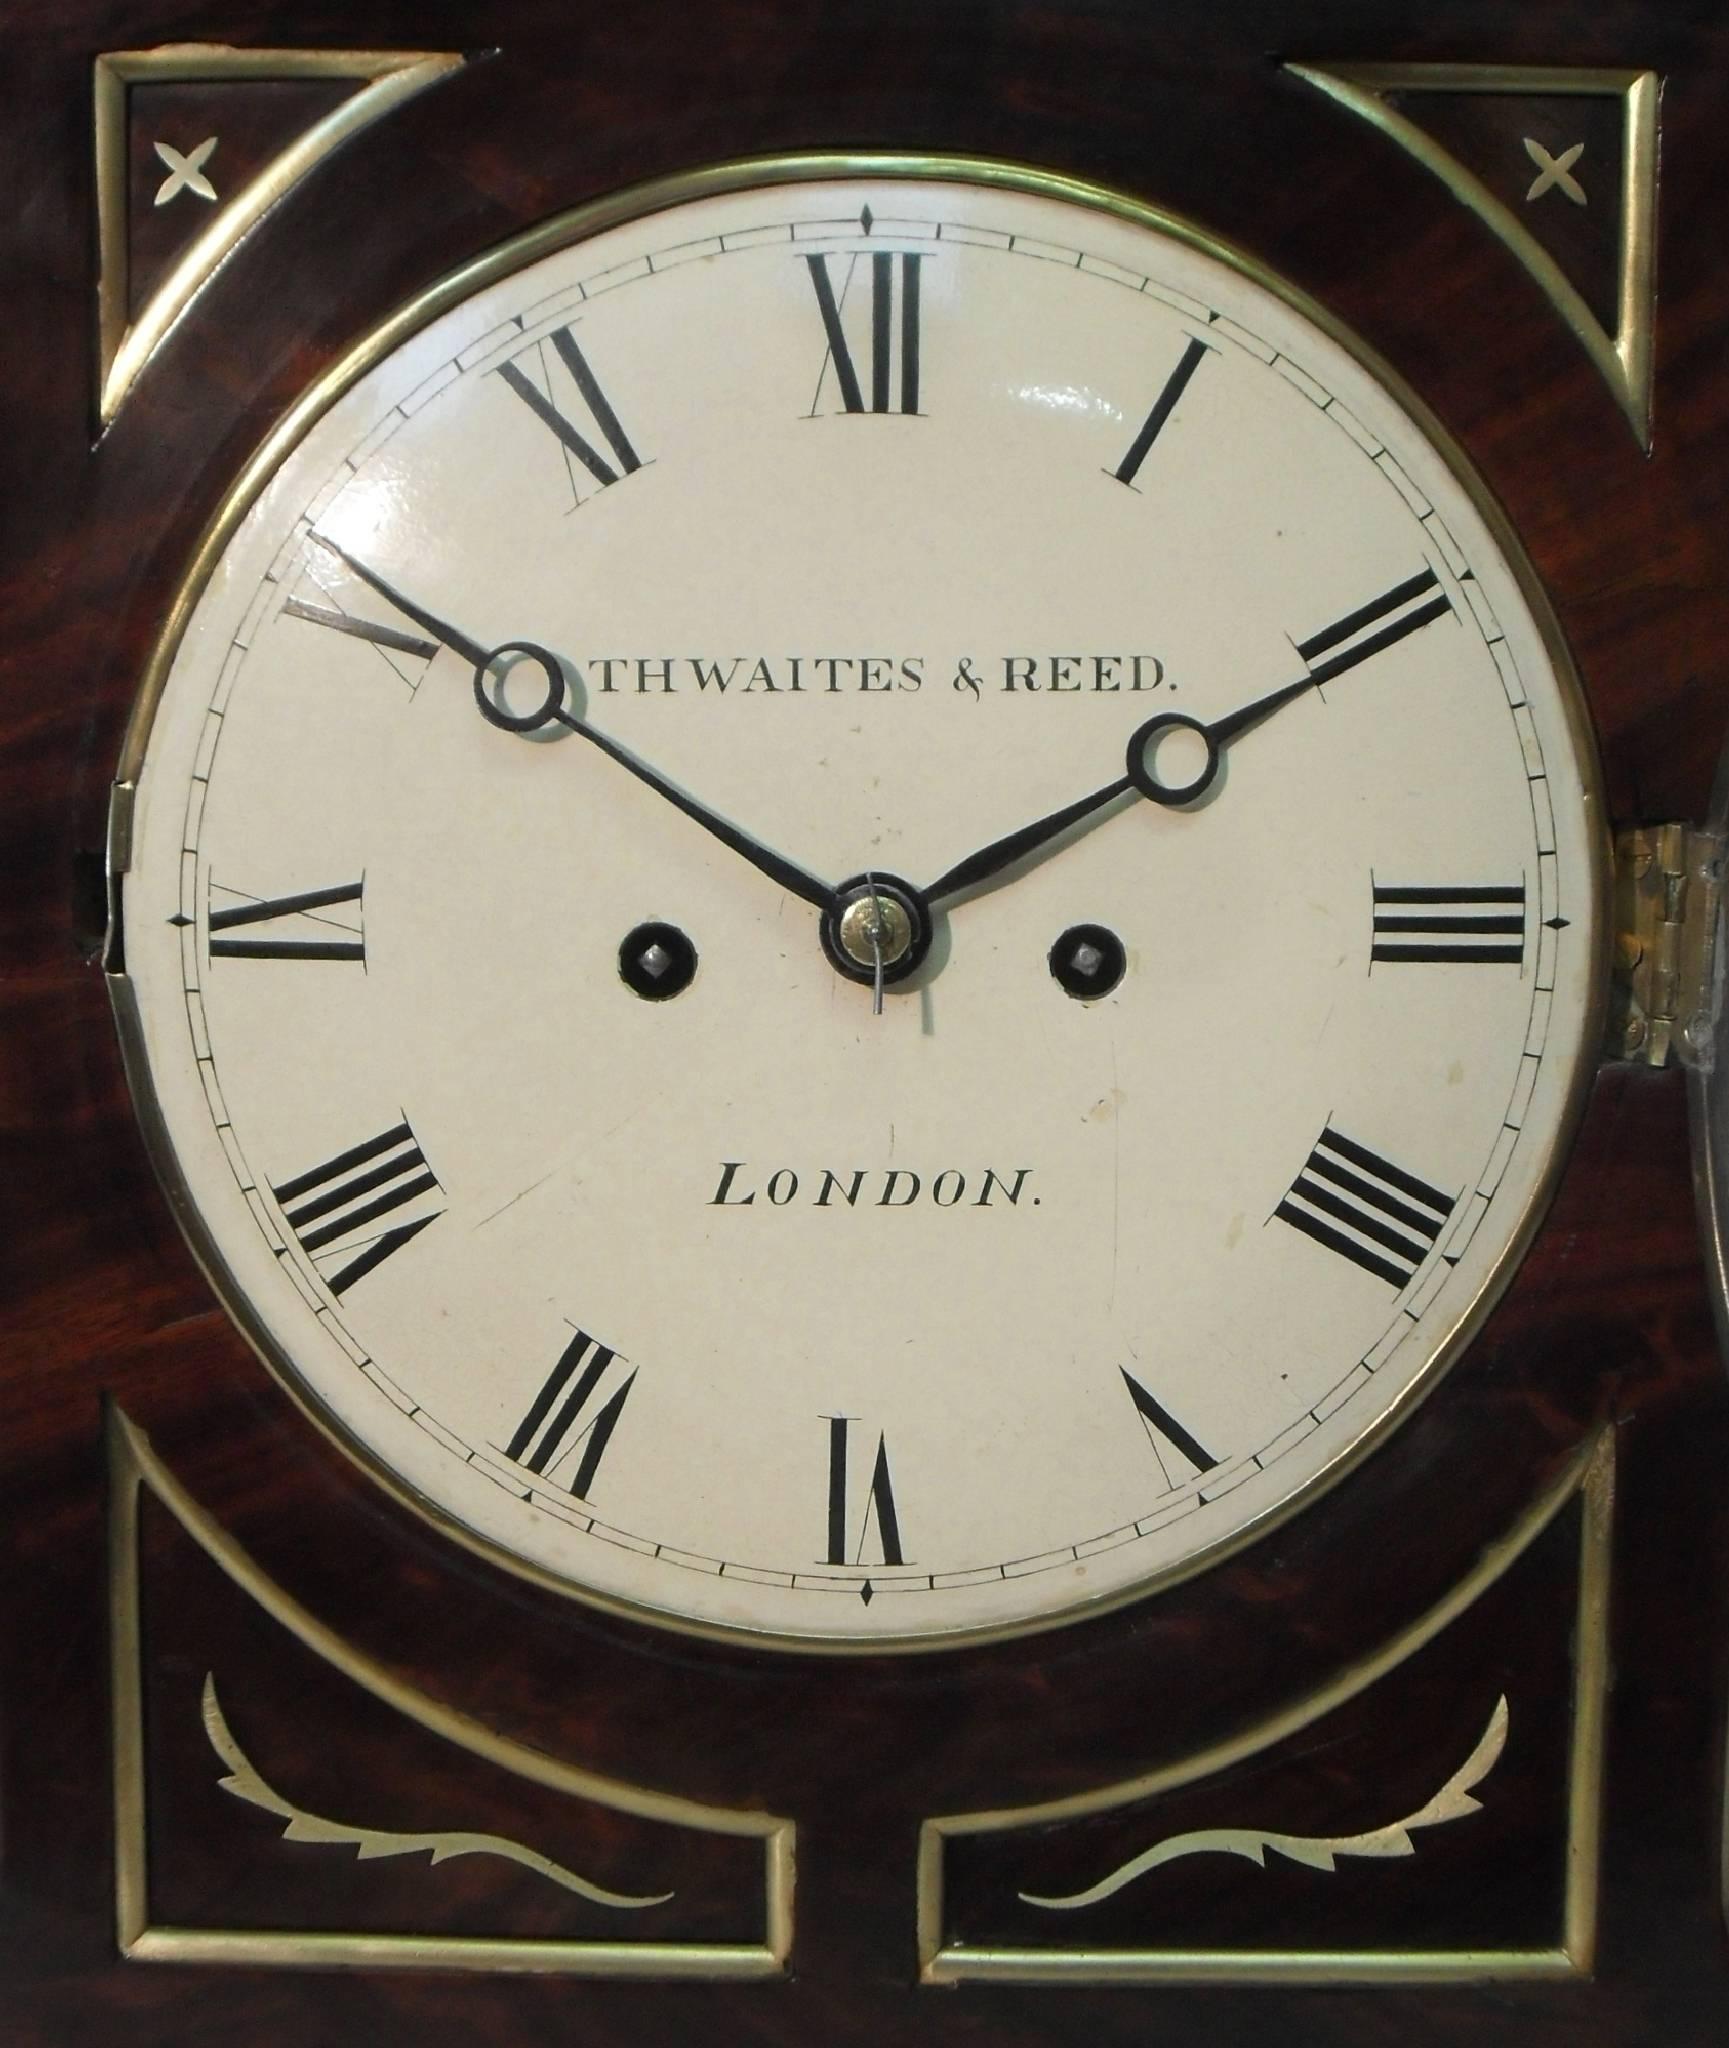 An extremely good quality English figured mahogany chamfer top bracket or table clock with ebony moulding, decorative brass inlay, inset corner panels and brass moulded edges to the front stood on brass ball feet finished with a pineapple finial to